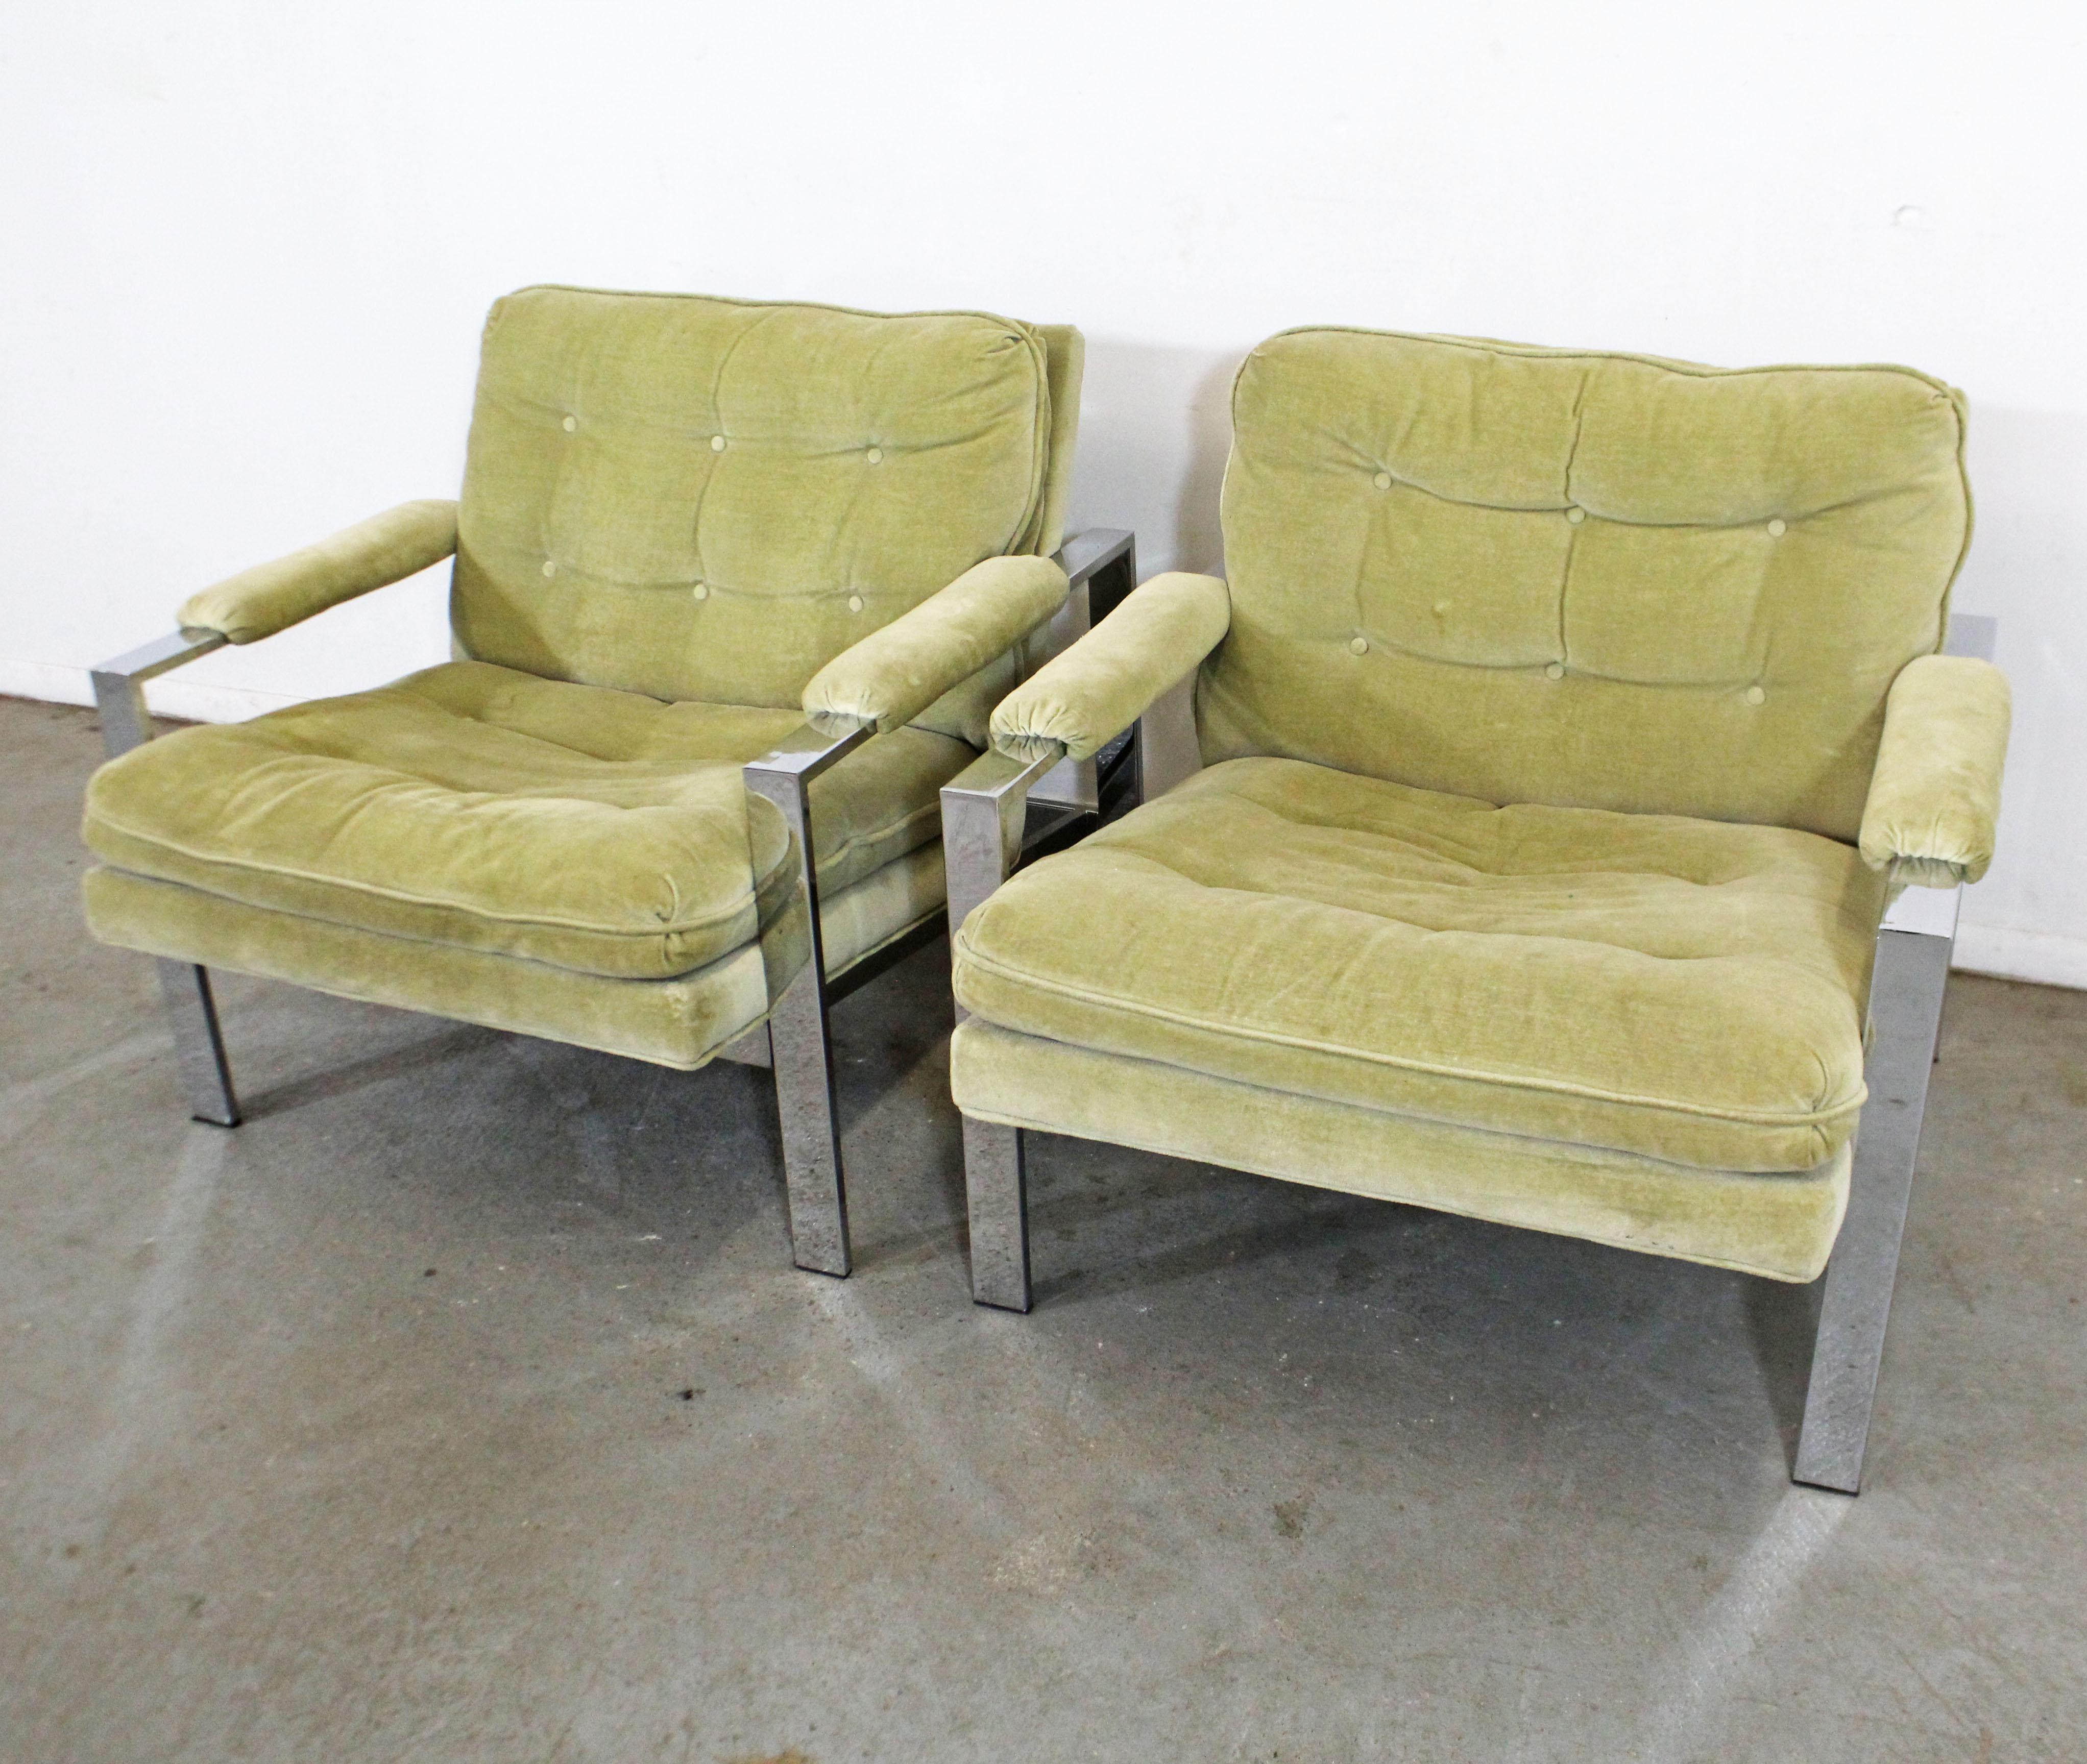 What a find. Offered is a pair of vintage Mid-Century Modern lounge chairs, designed by Milo Baughman for Thayer Coggin. They each have a chrome base and upholstered seats and arms. They are in decent condition, showing age wear (sun fade/stains on